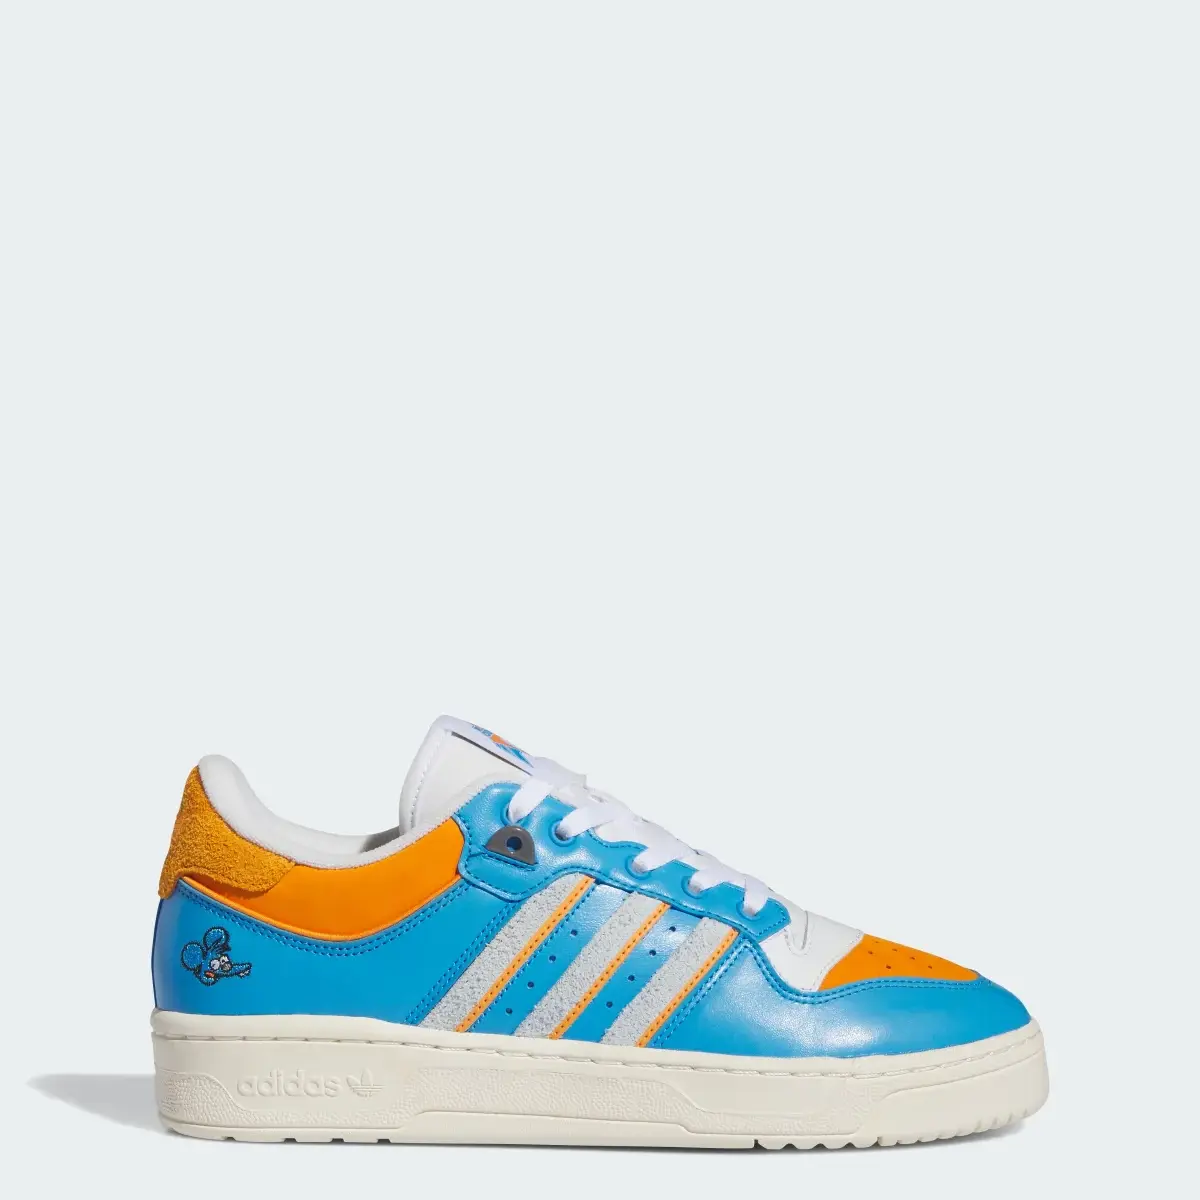 Adidas Sapatilhas adidas Rivalry Low Itchy. 1